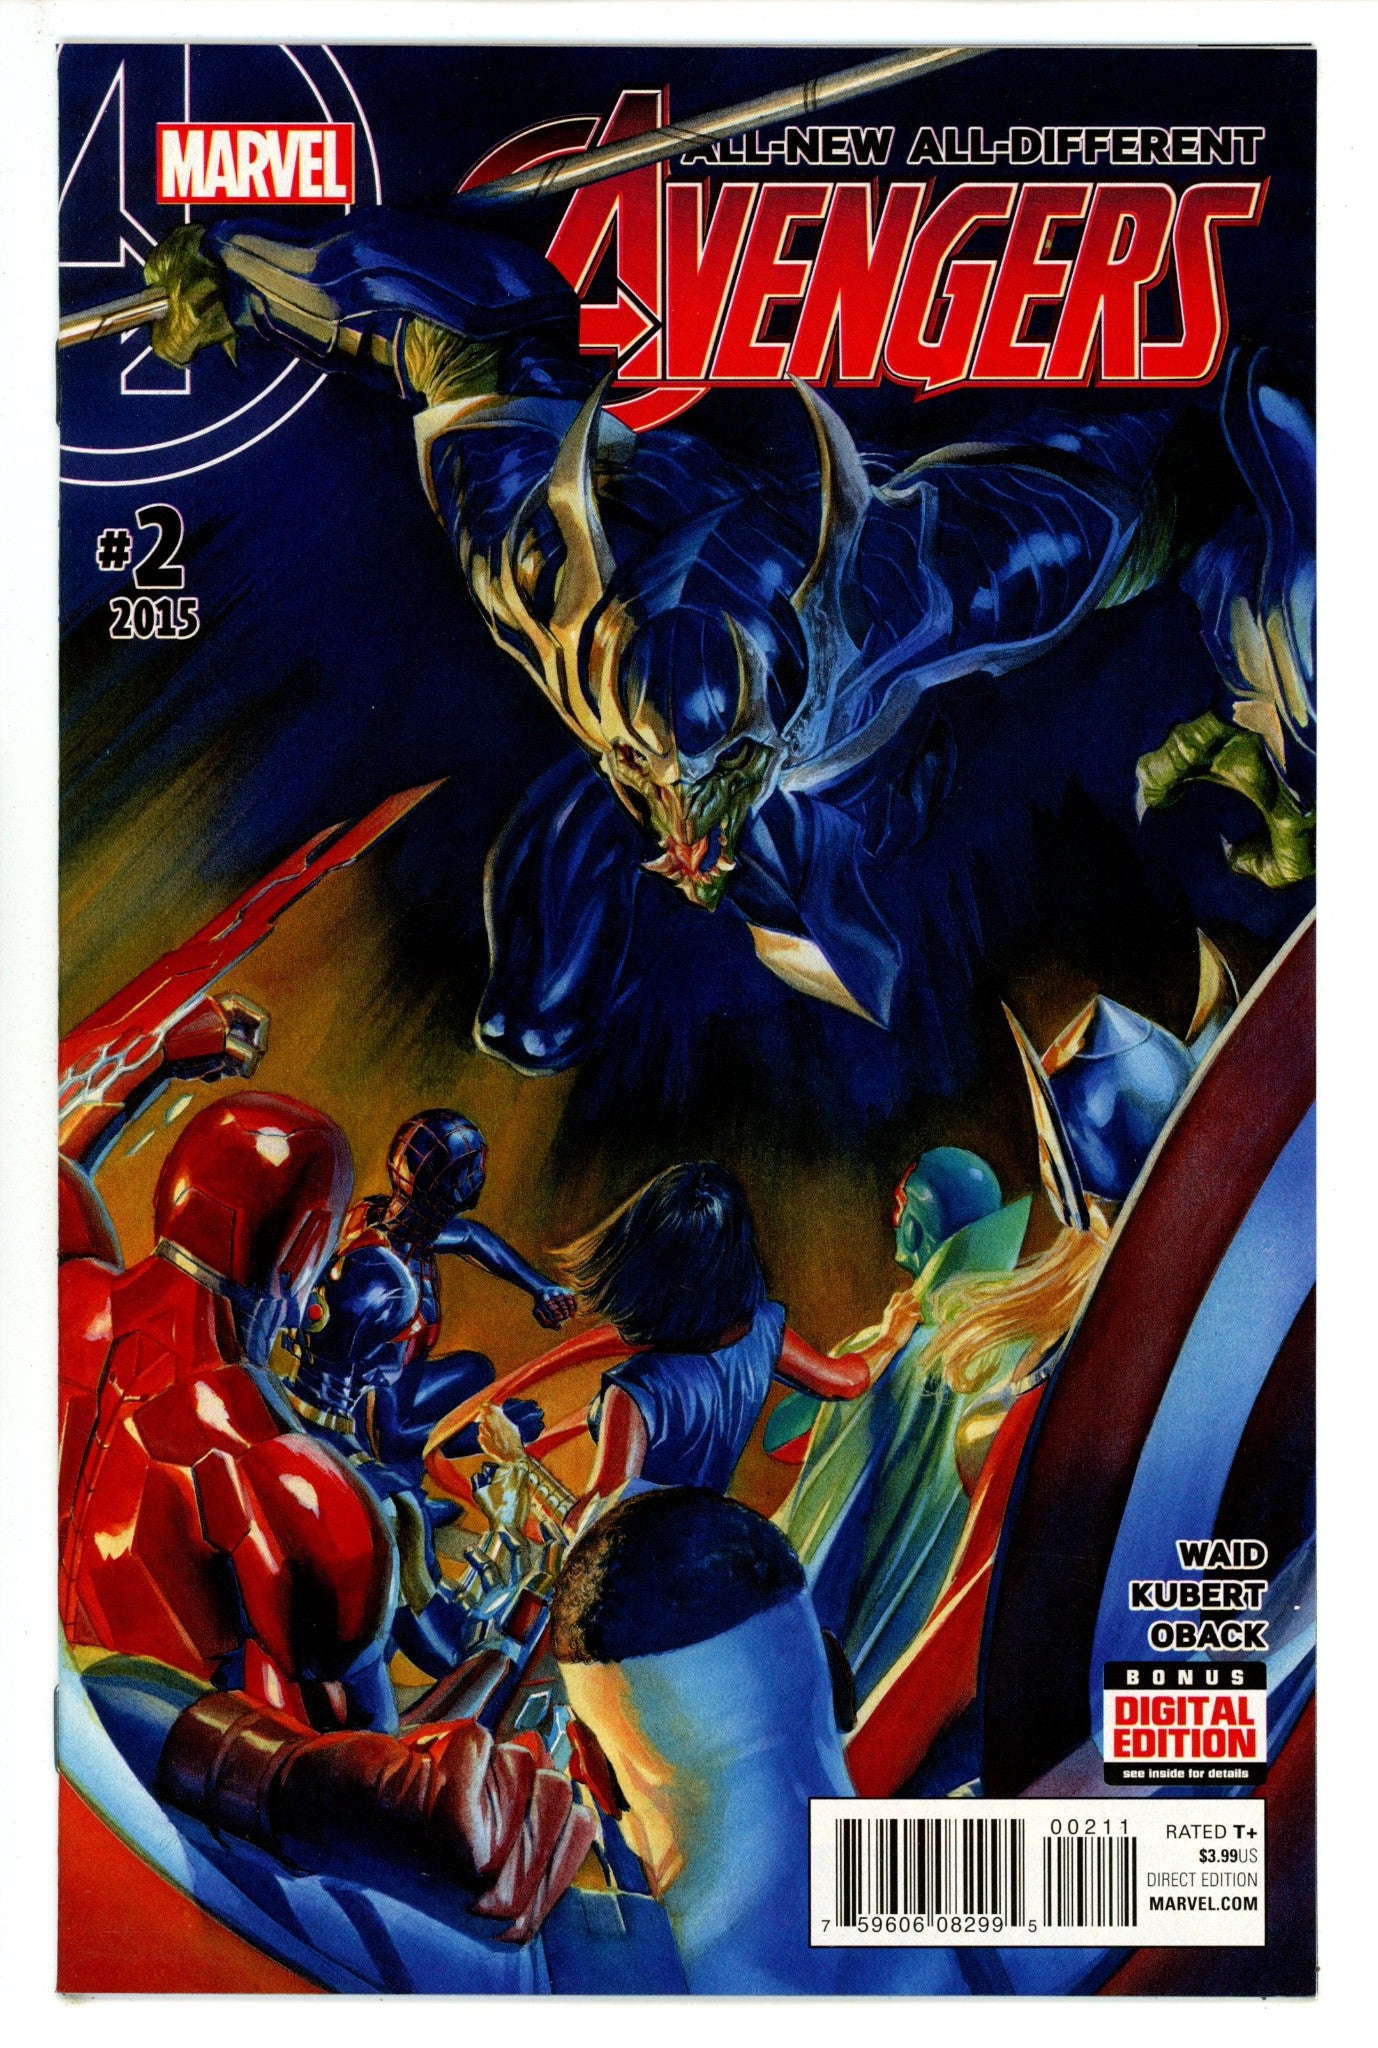 All-New, All-Different Avengers Vol 1 2 High Grade (2016) 